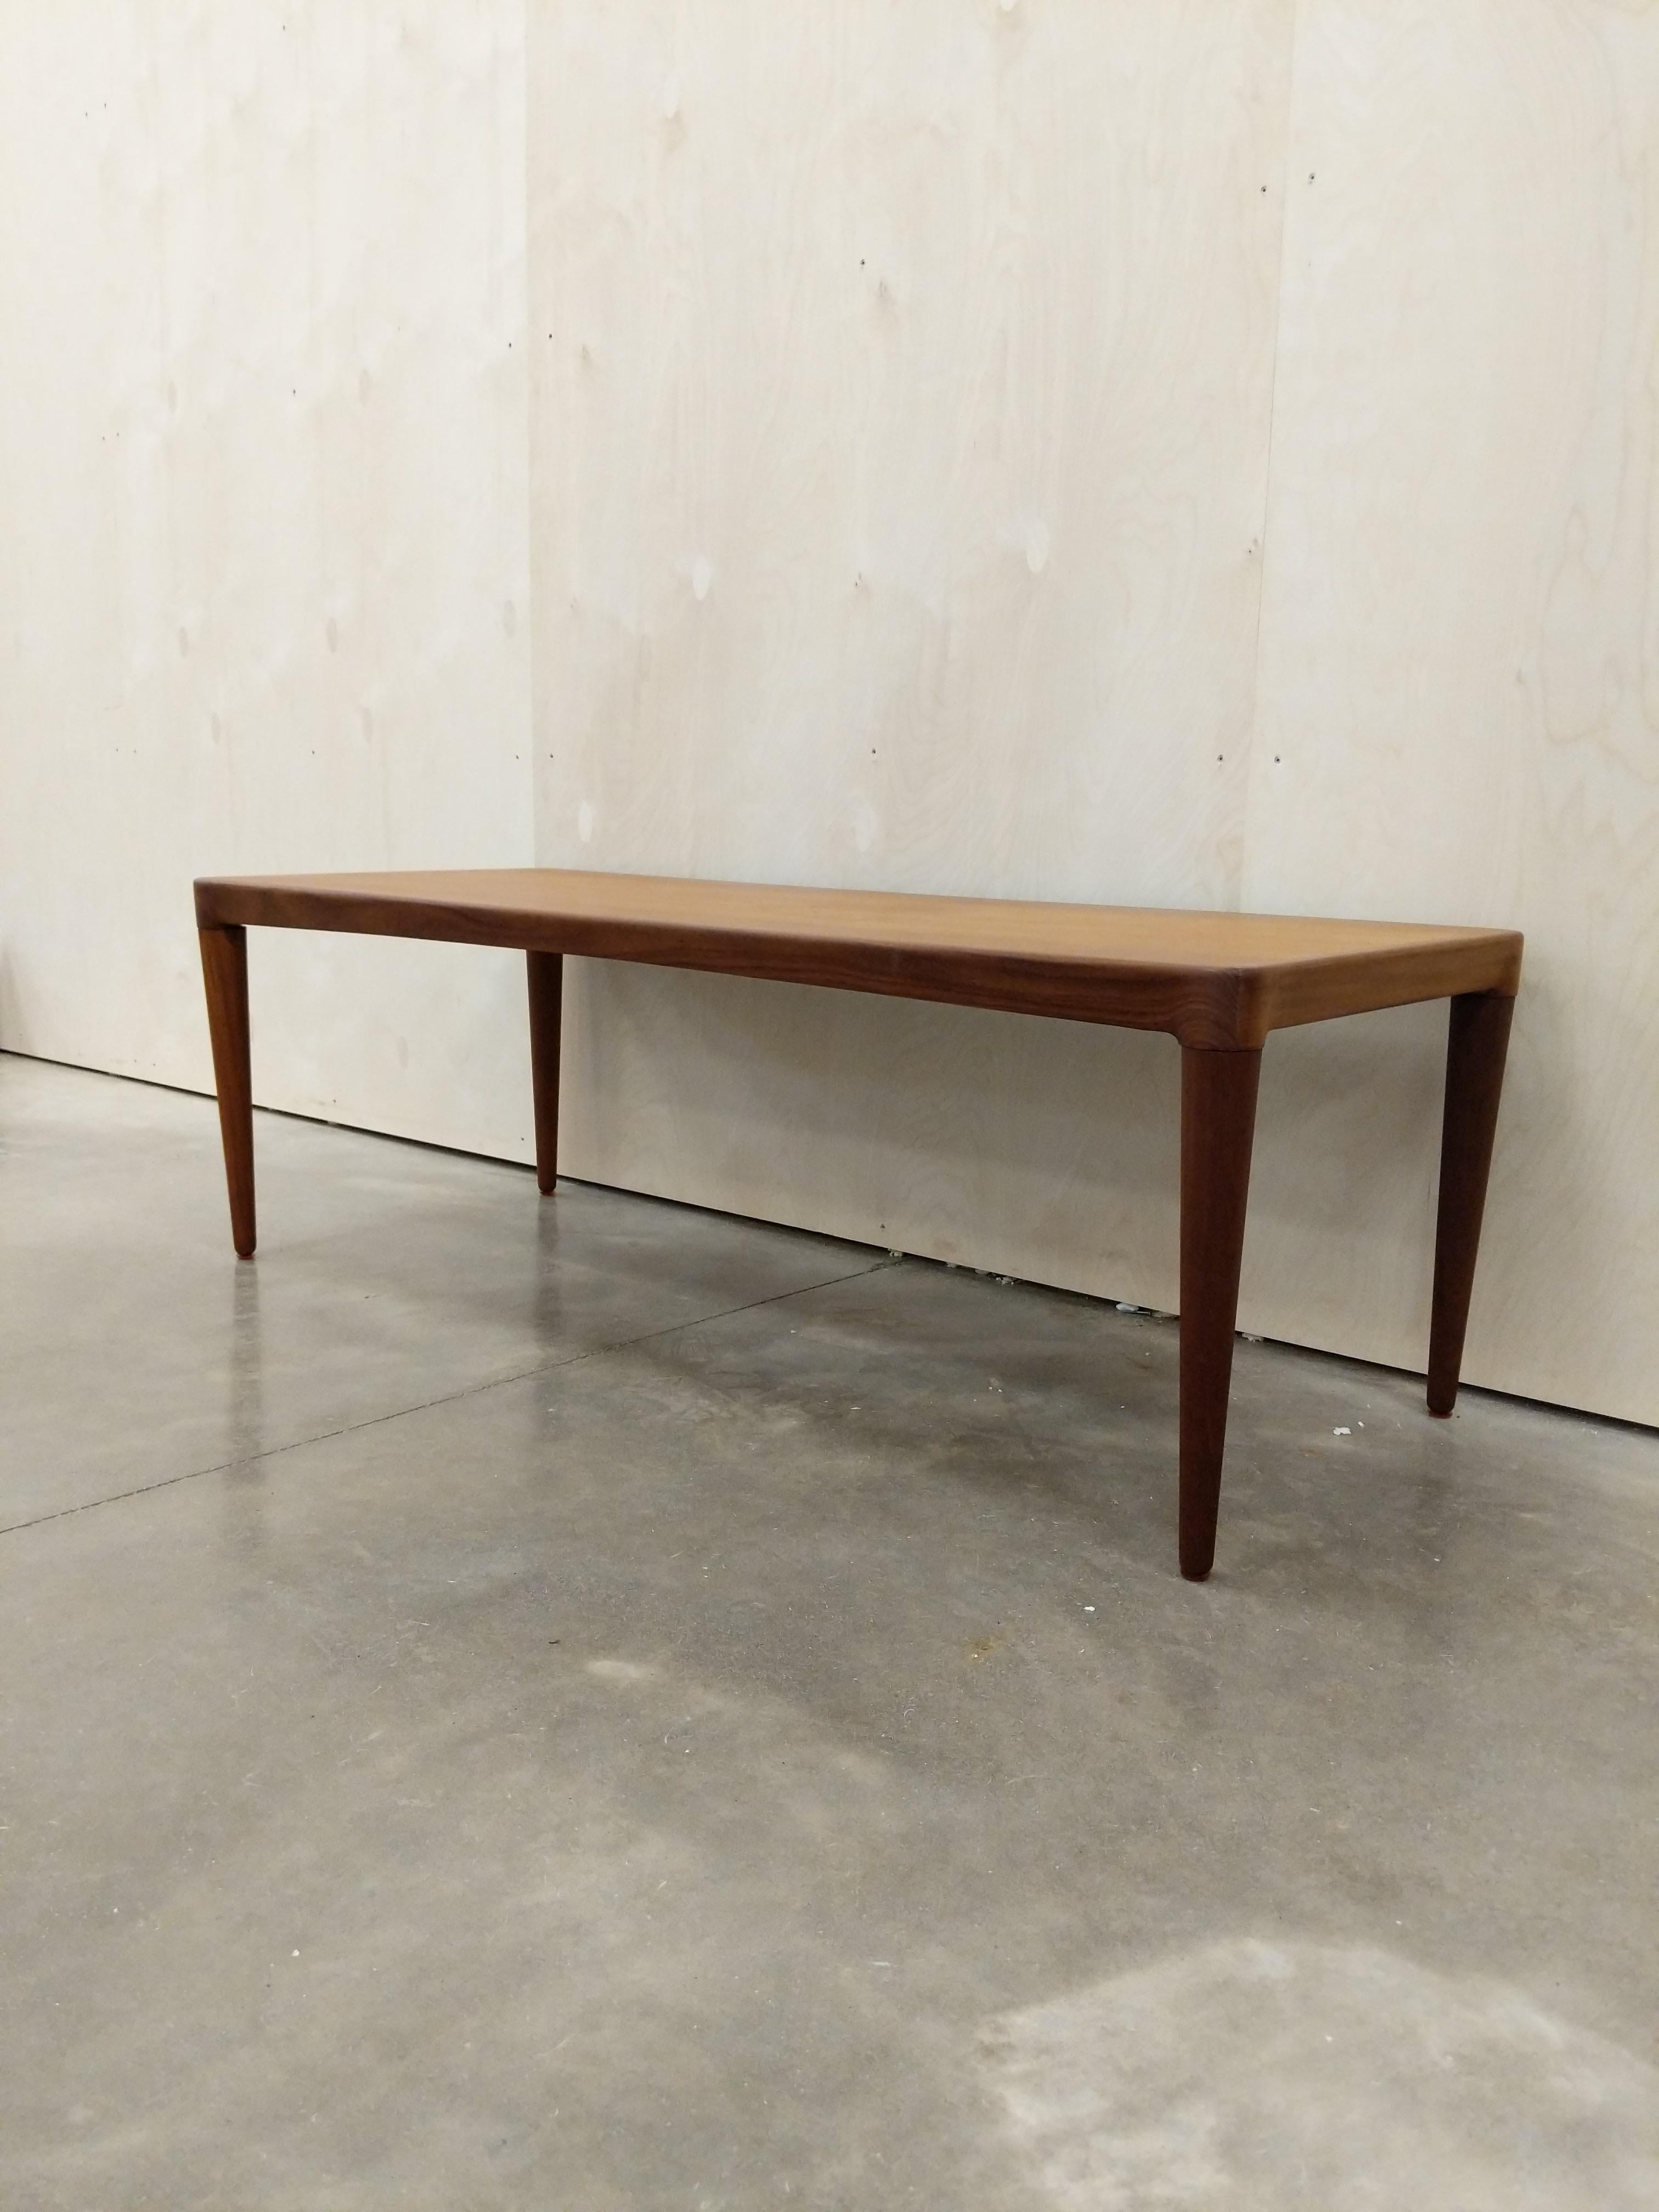 Authentic vintage mid century Danish / Scandinavian Modern teak coffee table.

With a pull-out surface on one end.

This piece is in excellent refinished condition with very few signs of age-related wear (see photos).

If you would like any